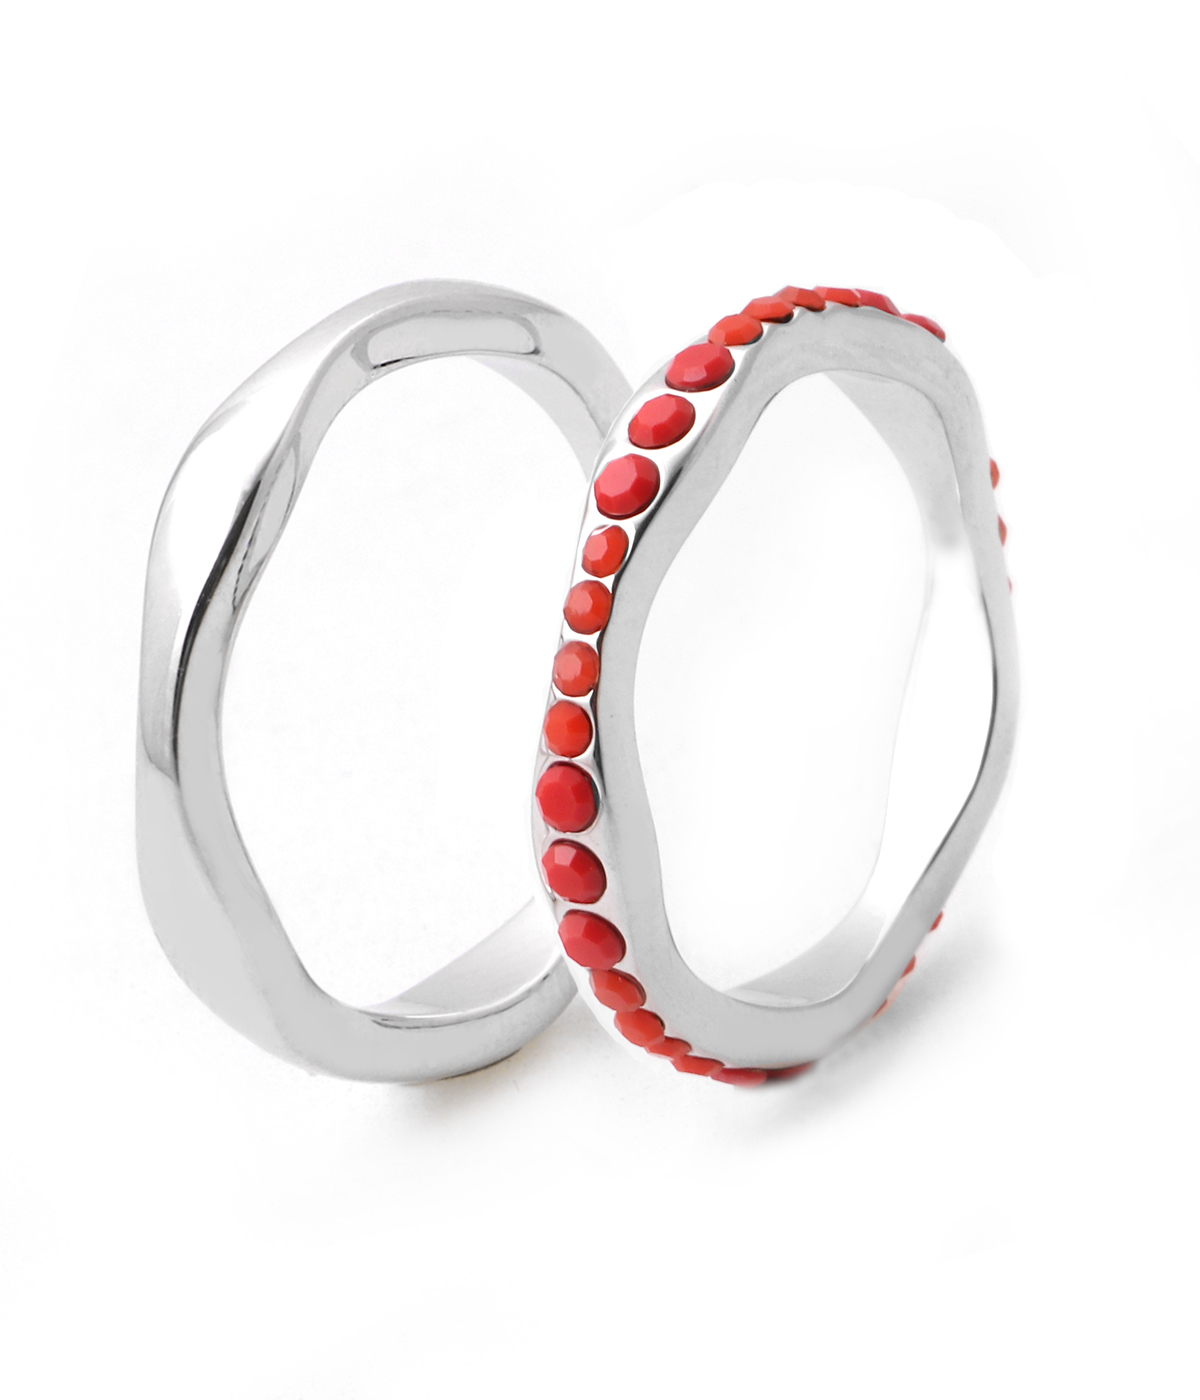 FLOW-Red -latest RING,Band Ring design 2021